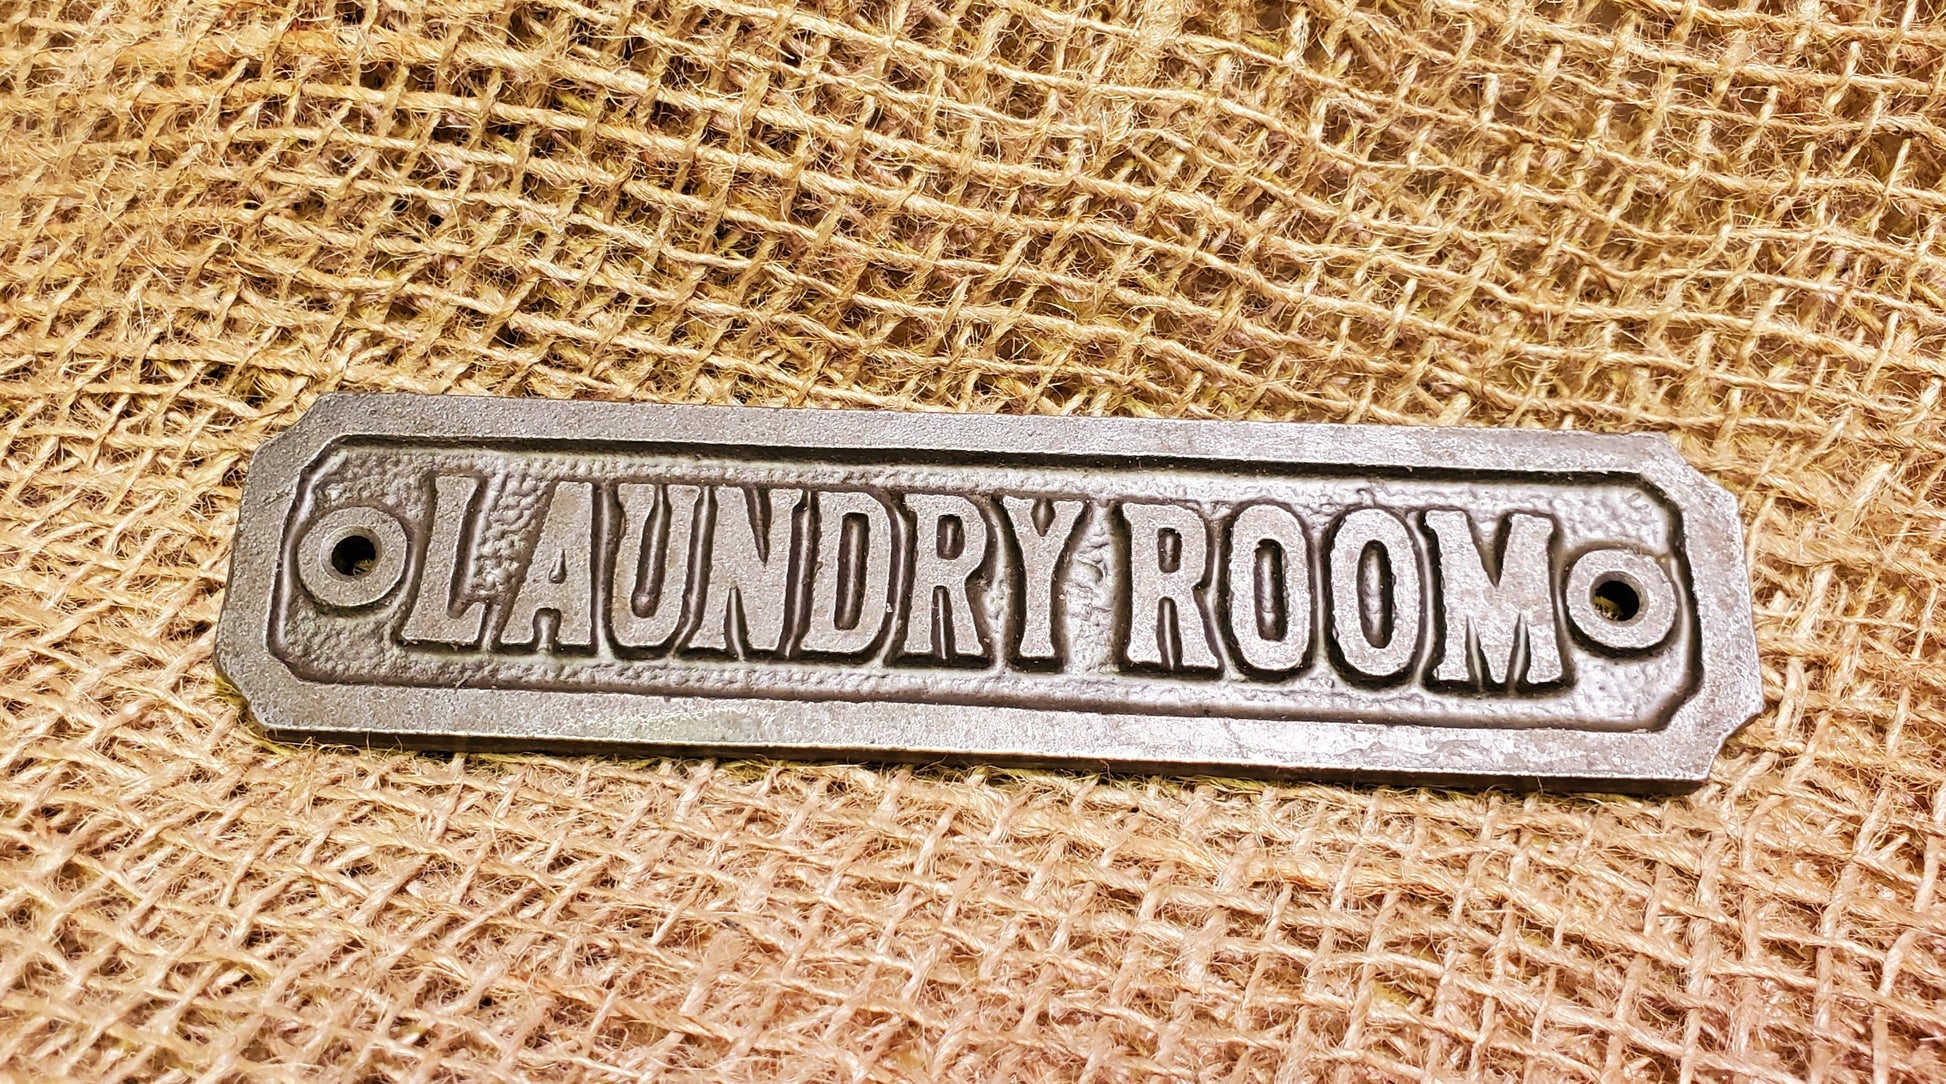 Laundry Room - Spearhead Collection - Plaques and Signs - Country Farmhouse, Home Decor, Plaques and Signs